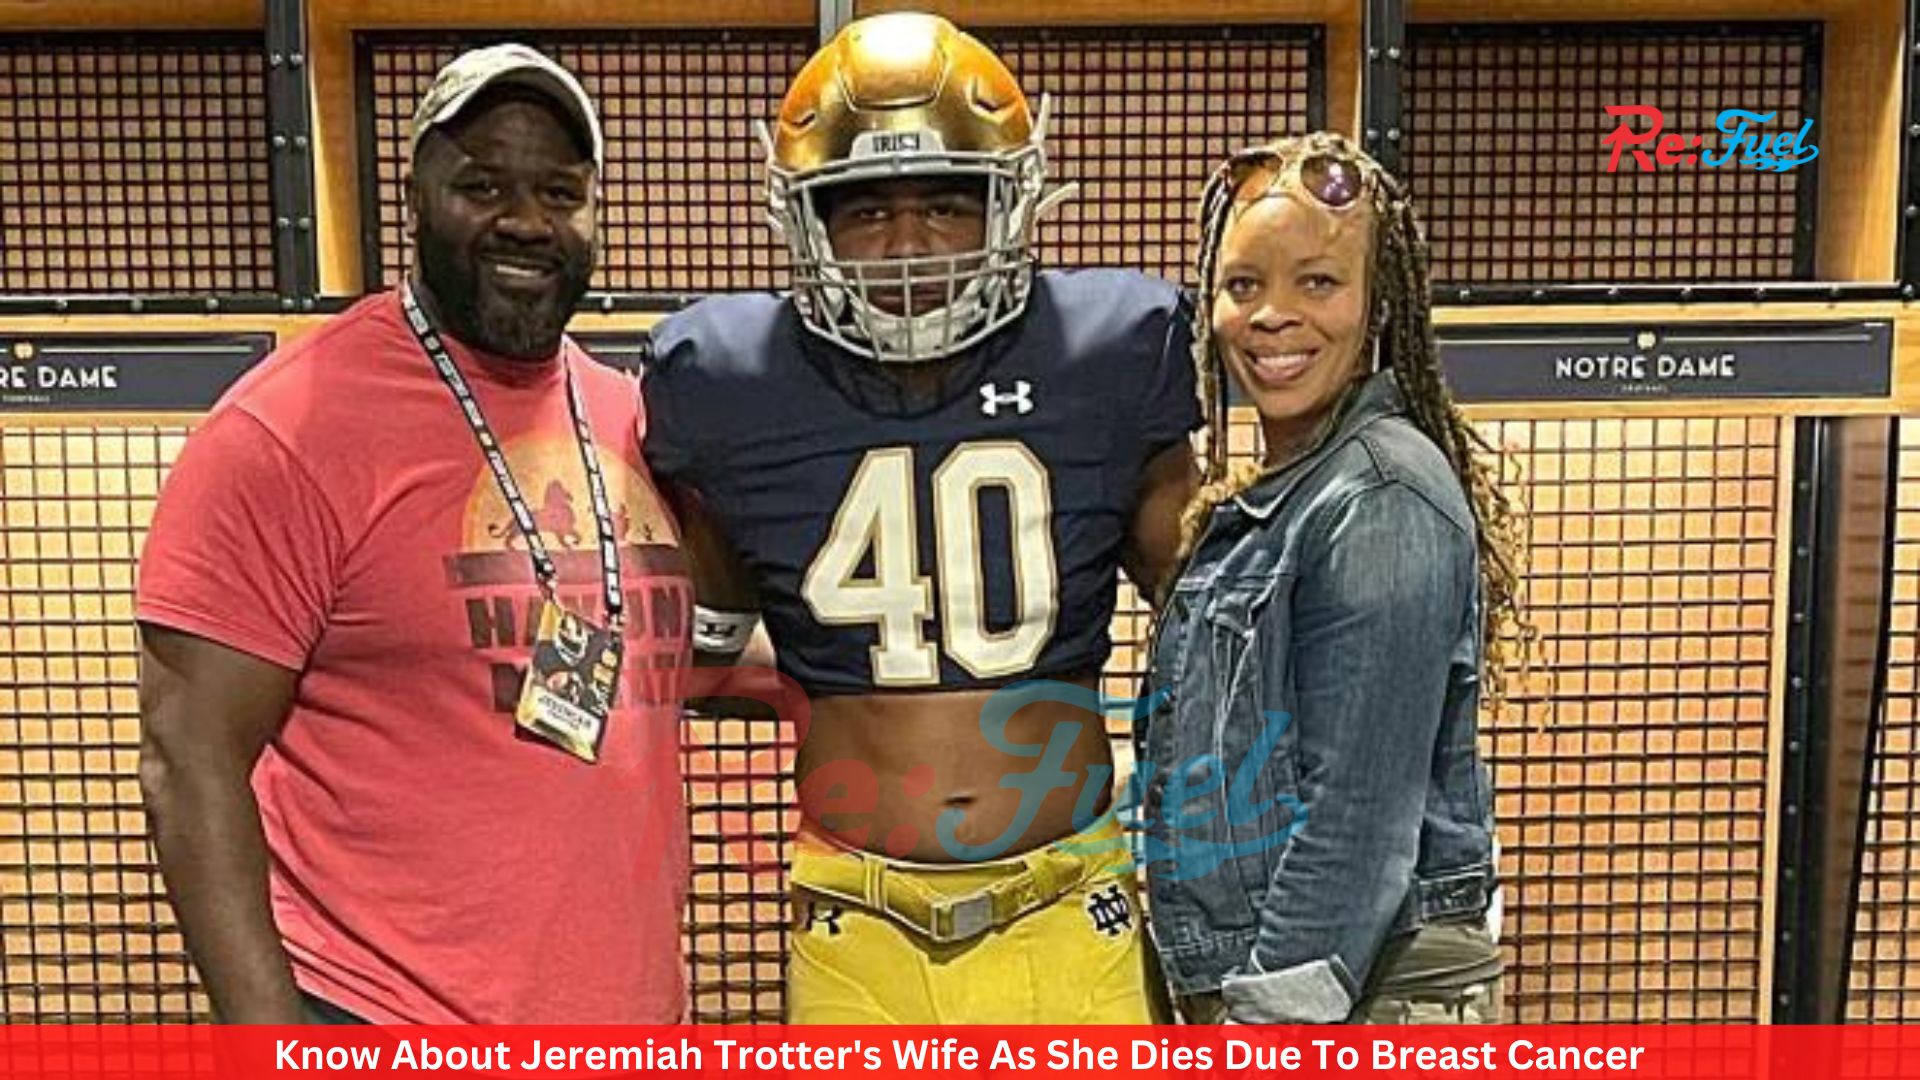 Know About Jeremiah Trotter's Wife As She Dies Due To Breast Cancer